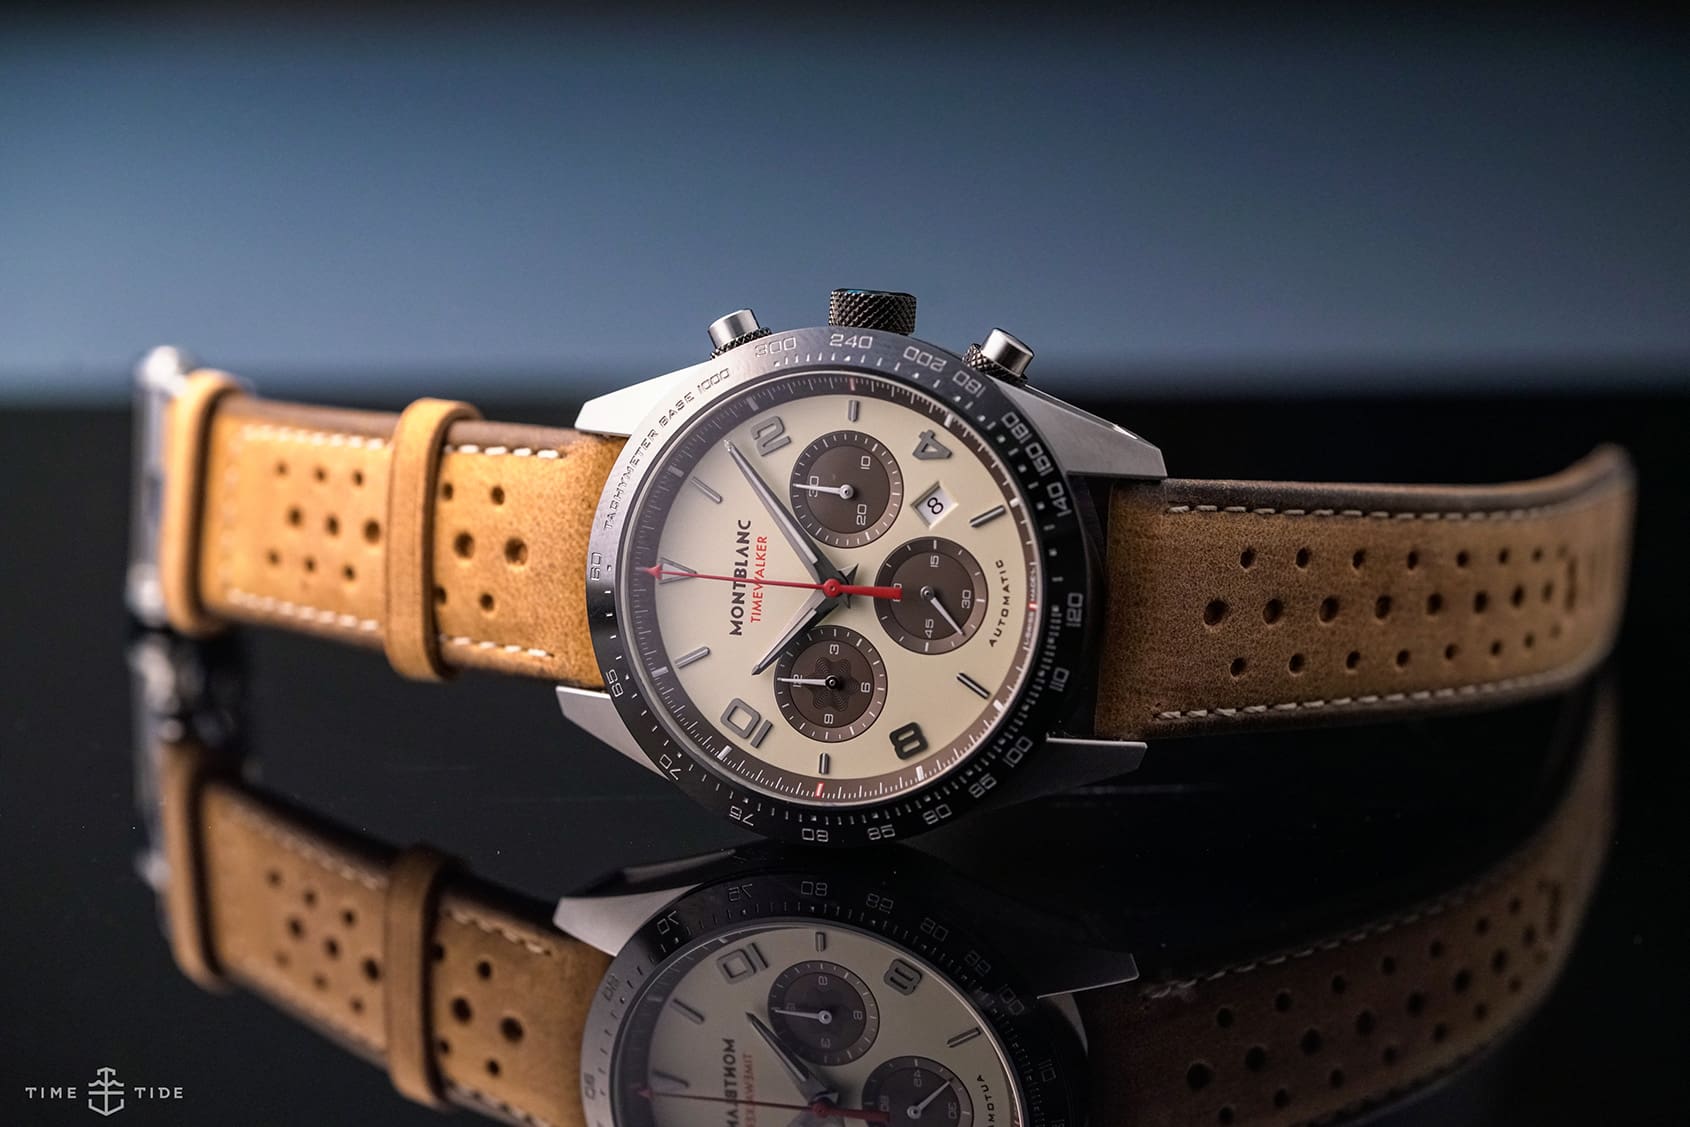 HANDS-ON: The Montblanc TimeWalker Manufacture Chronograph for the Goodwood Festival of Speed